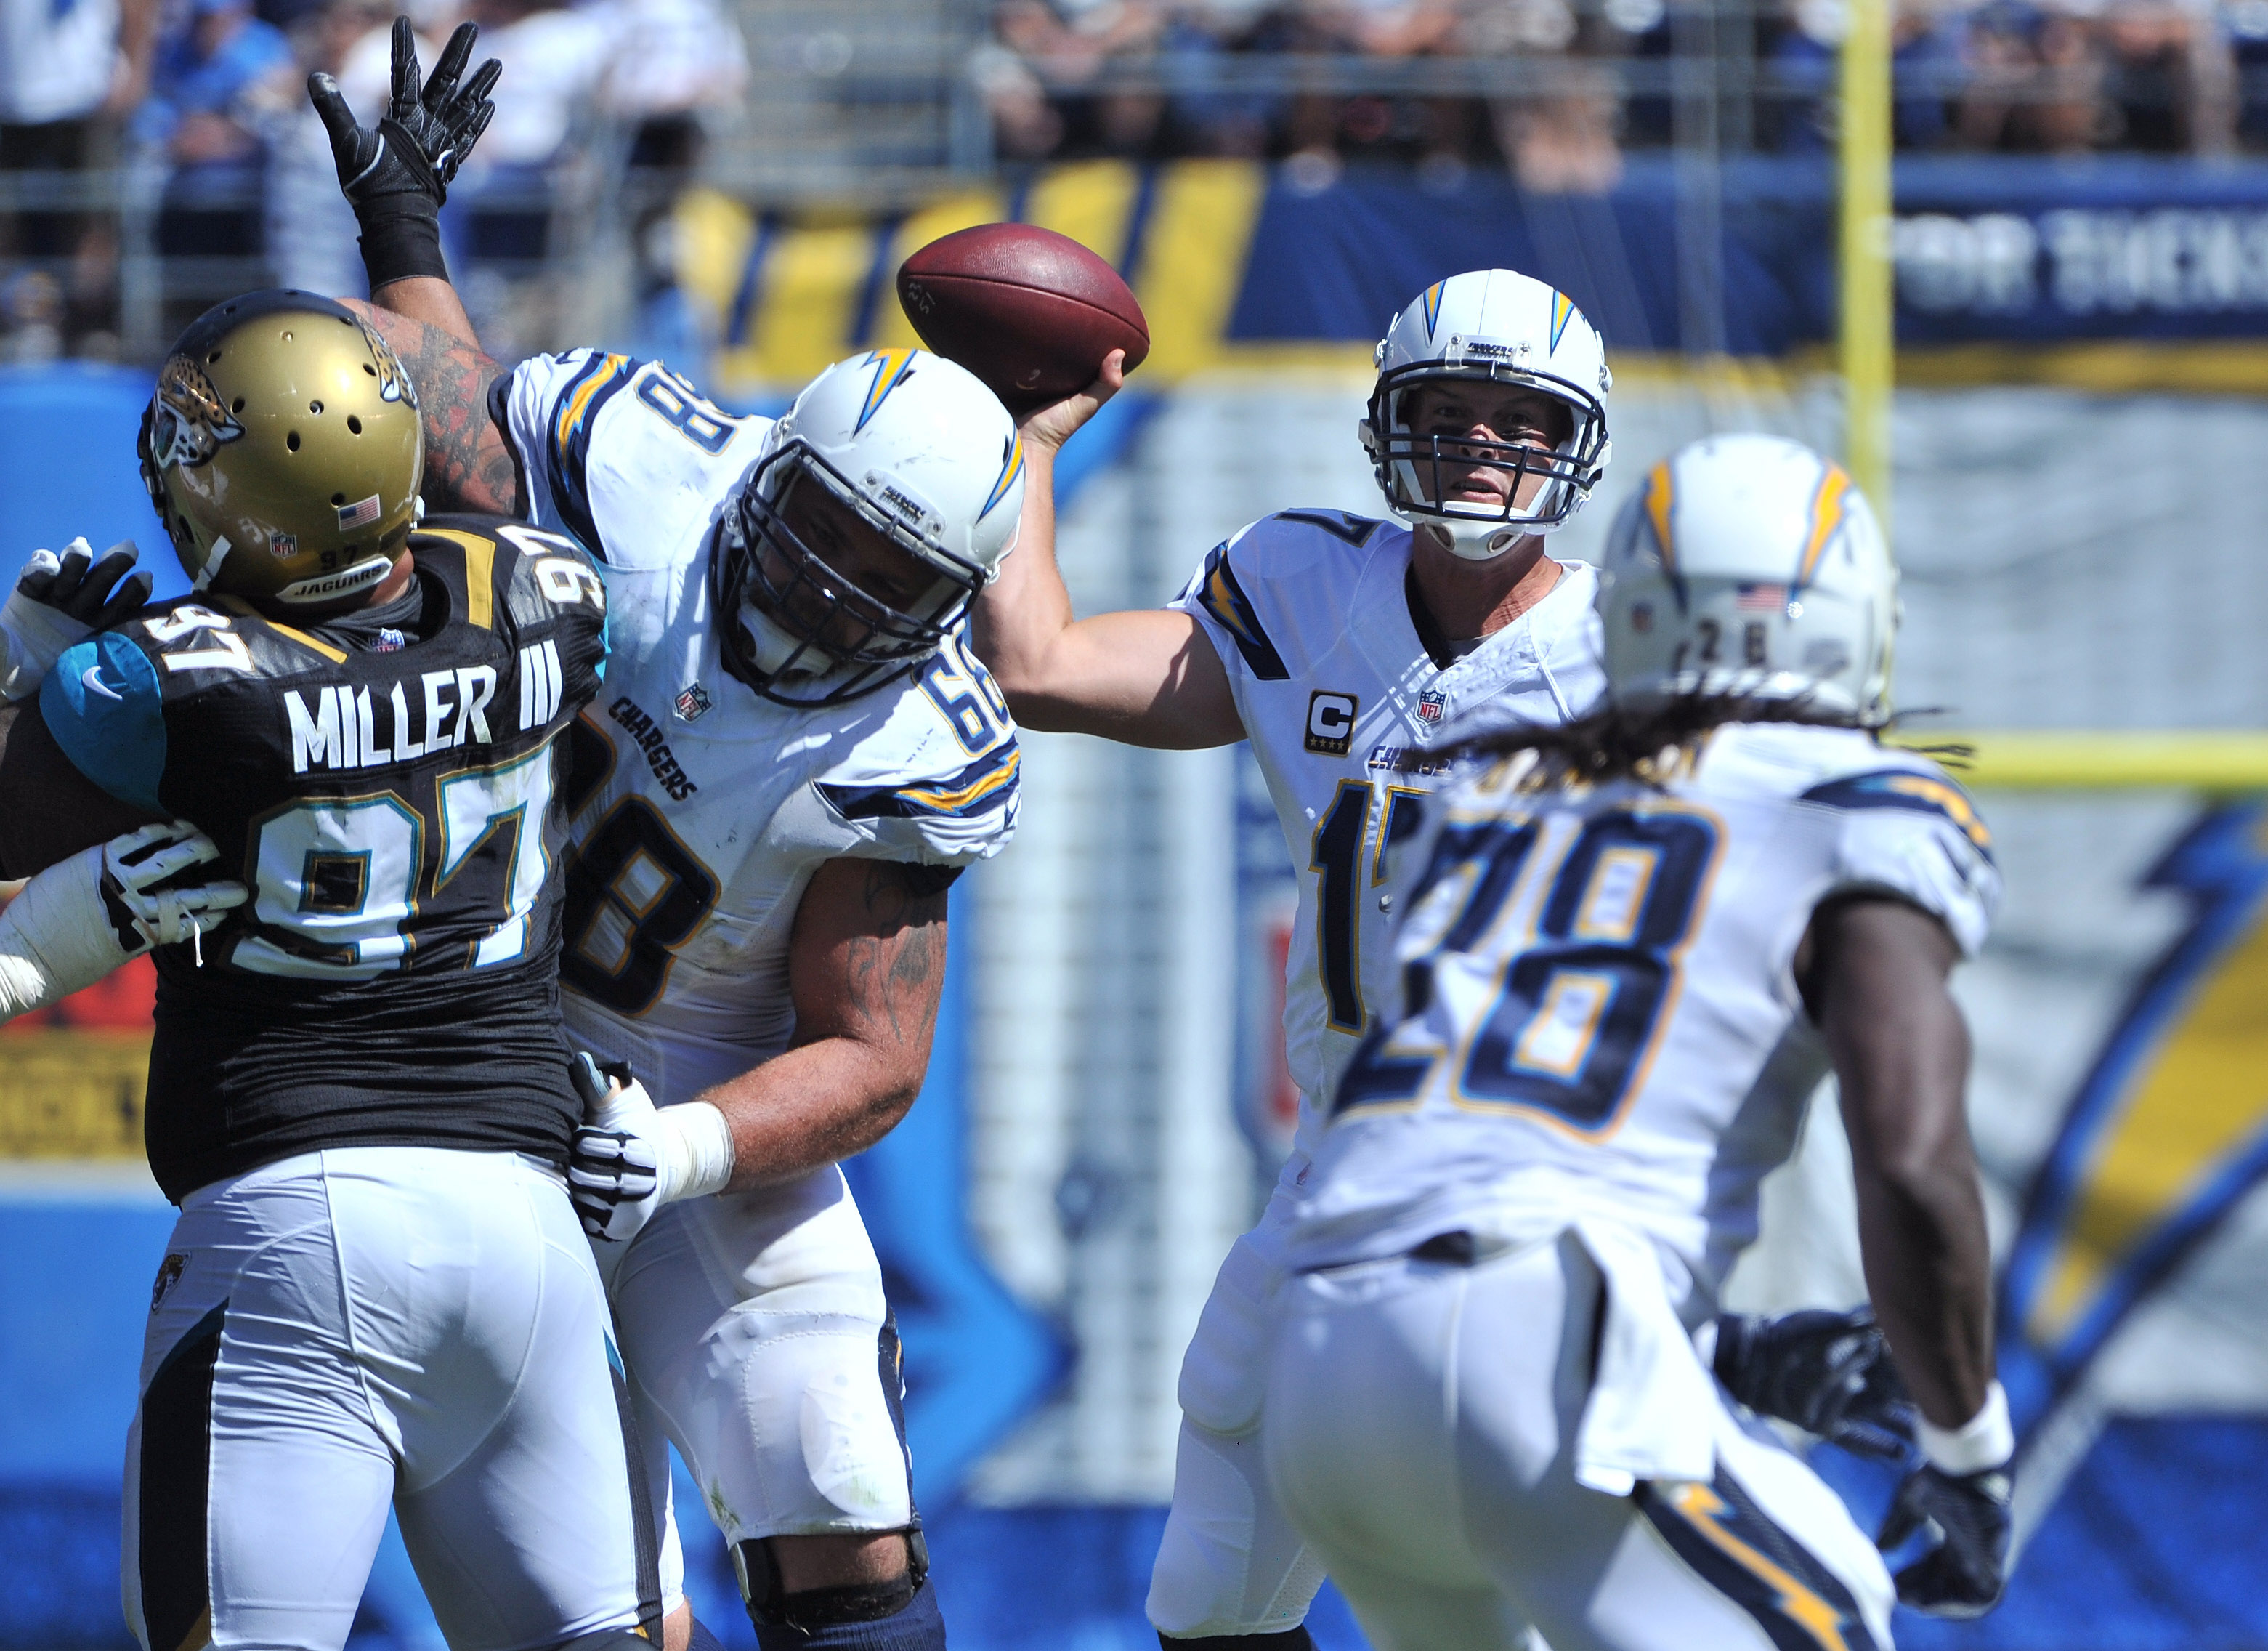 Jaguars humiliated in 38-14 blowout loss to the Chargers on the road